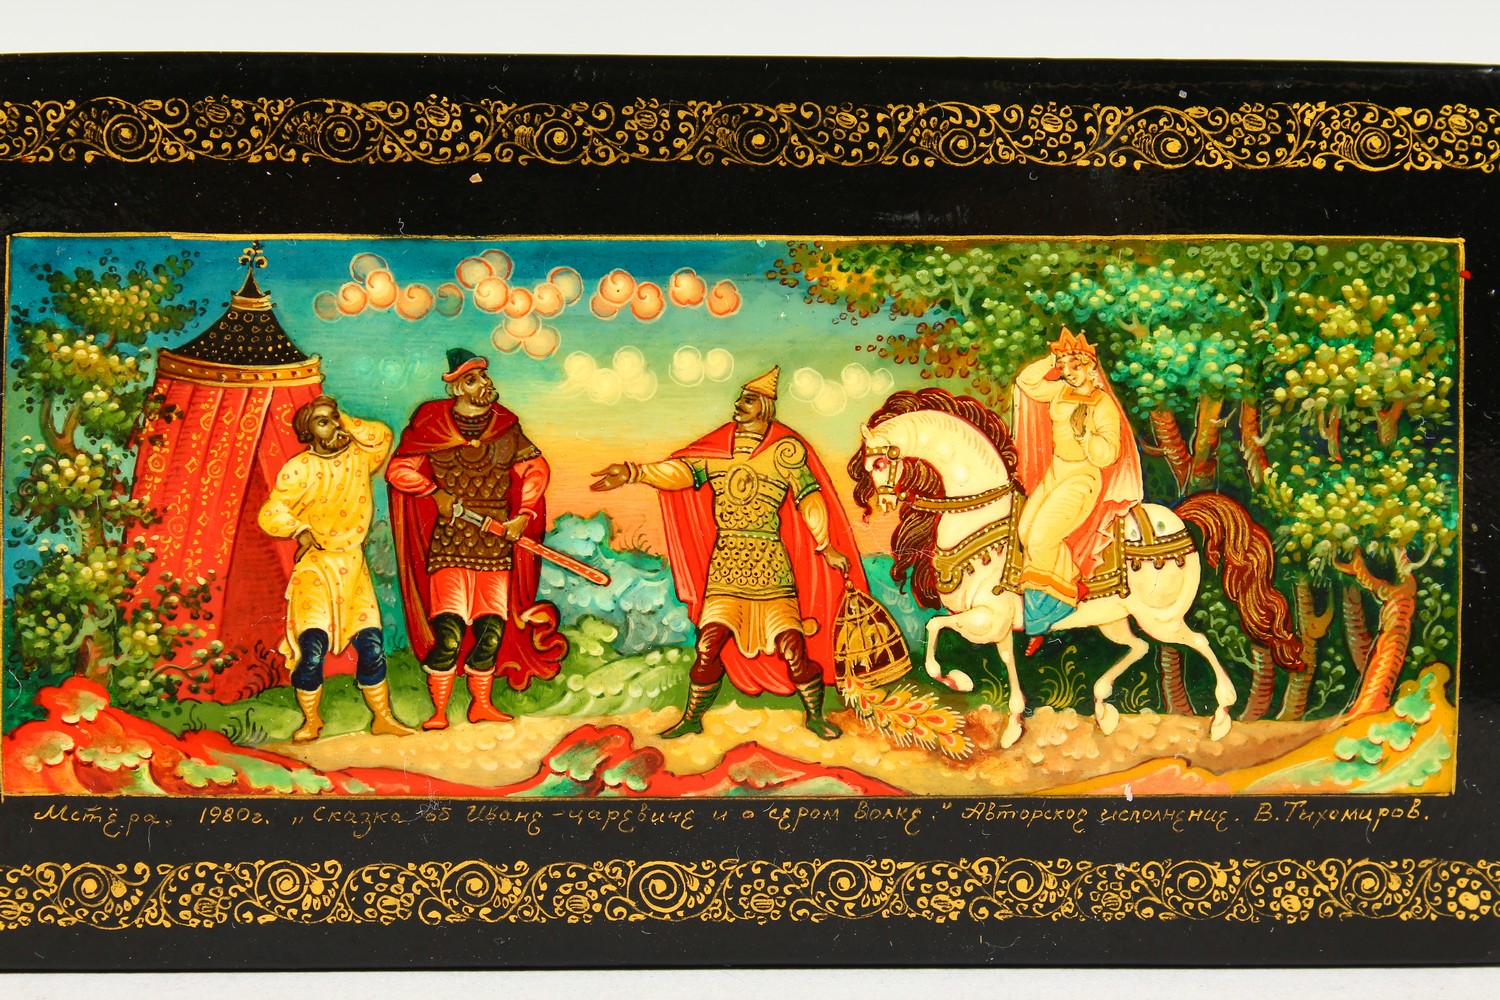 A RUSSIAN BLACK PAPIER MACHE BOX, "Knight and Lady on Horseback", in original cardboard box. 4. - Image 2 of 14